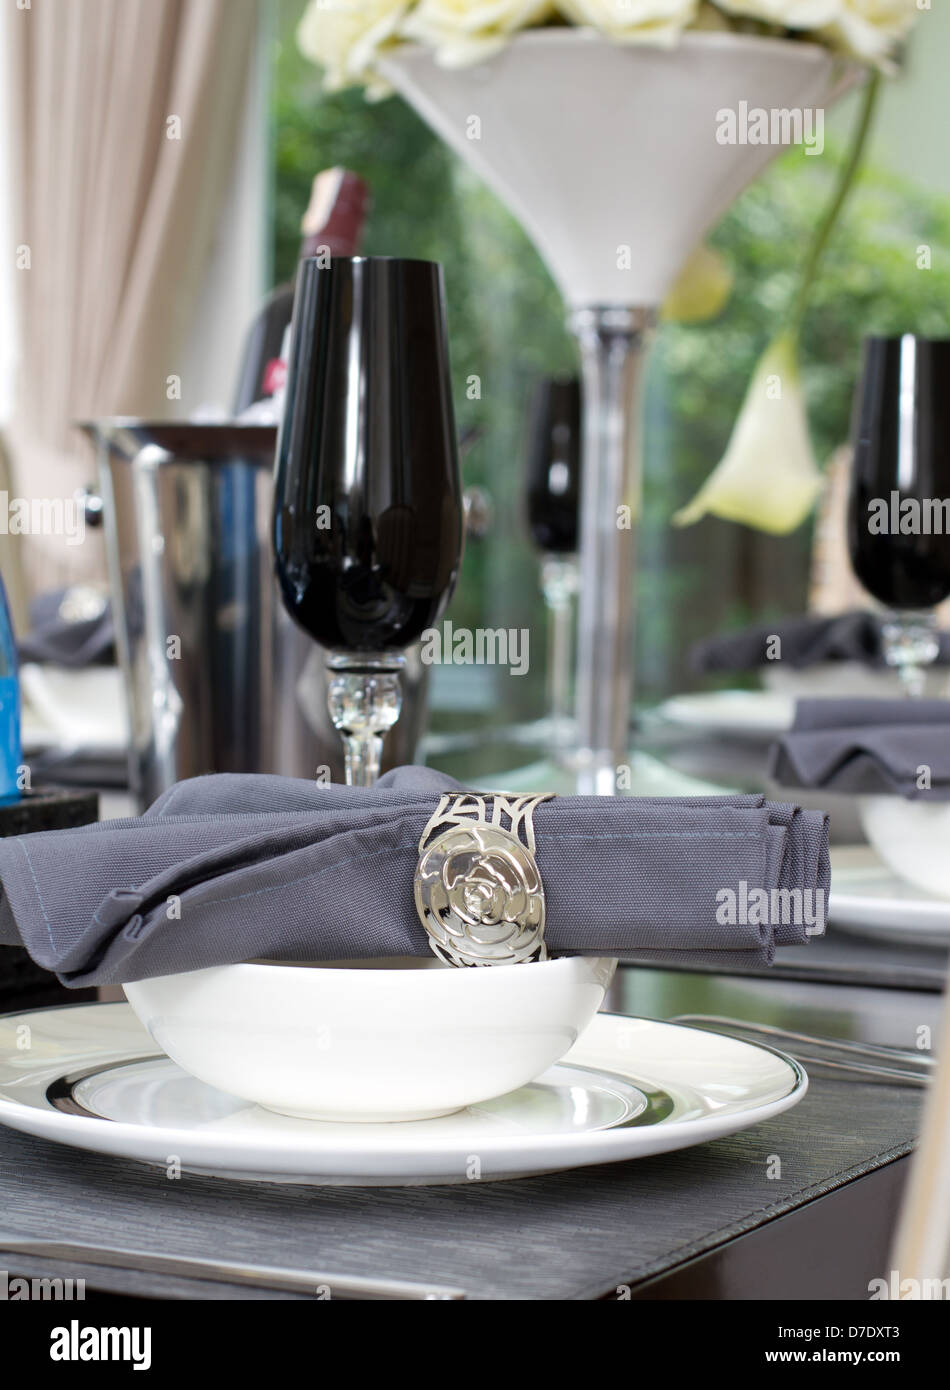 Dinner table setting with wine and luxury wine glasses Stock Photo